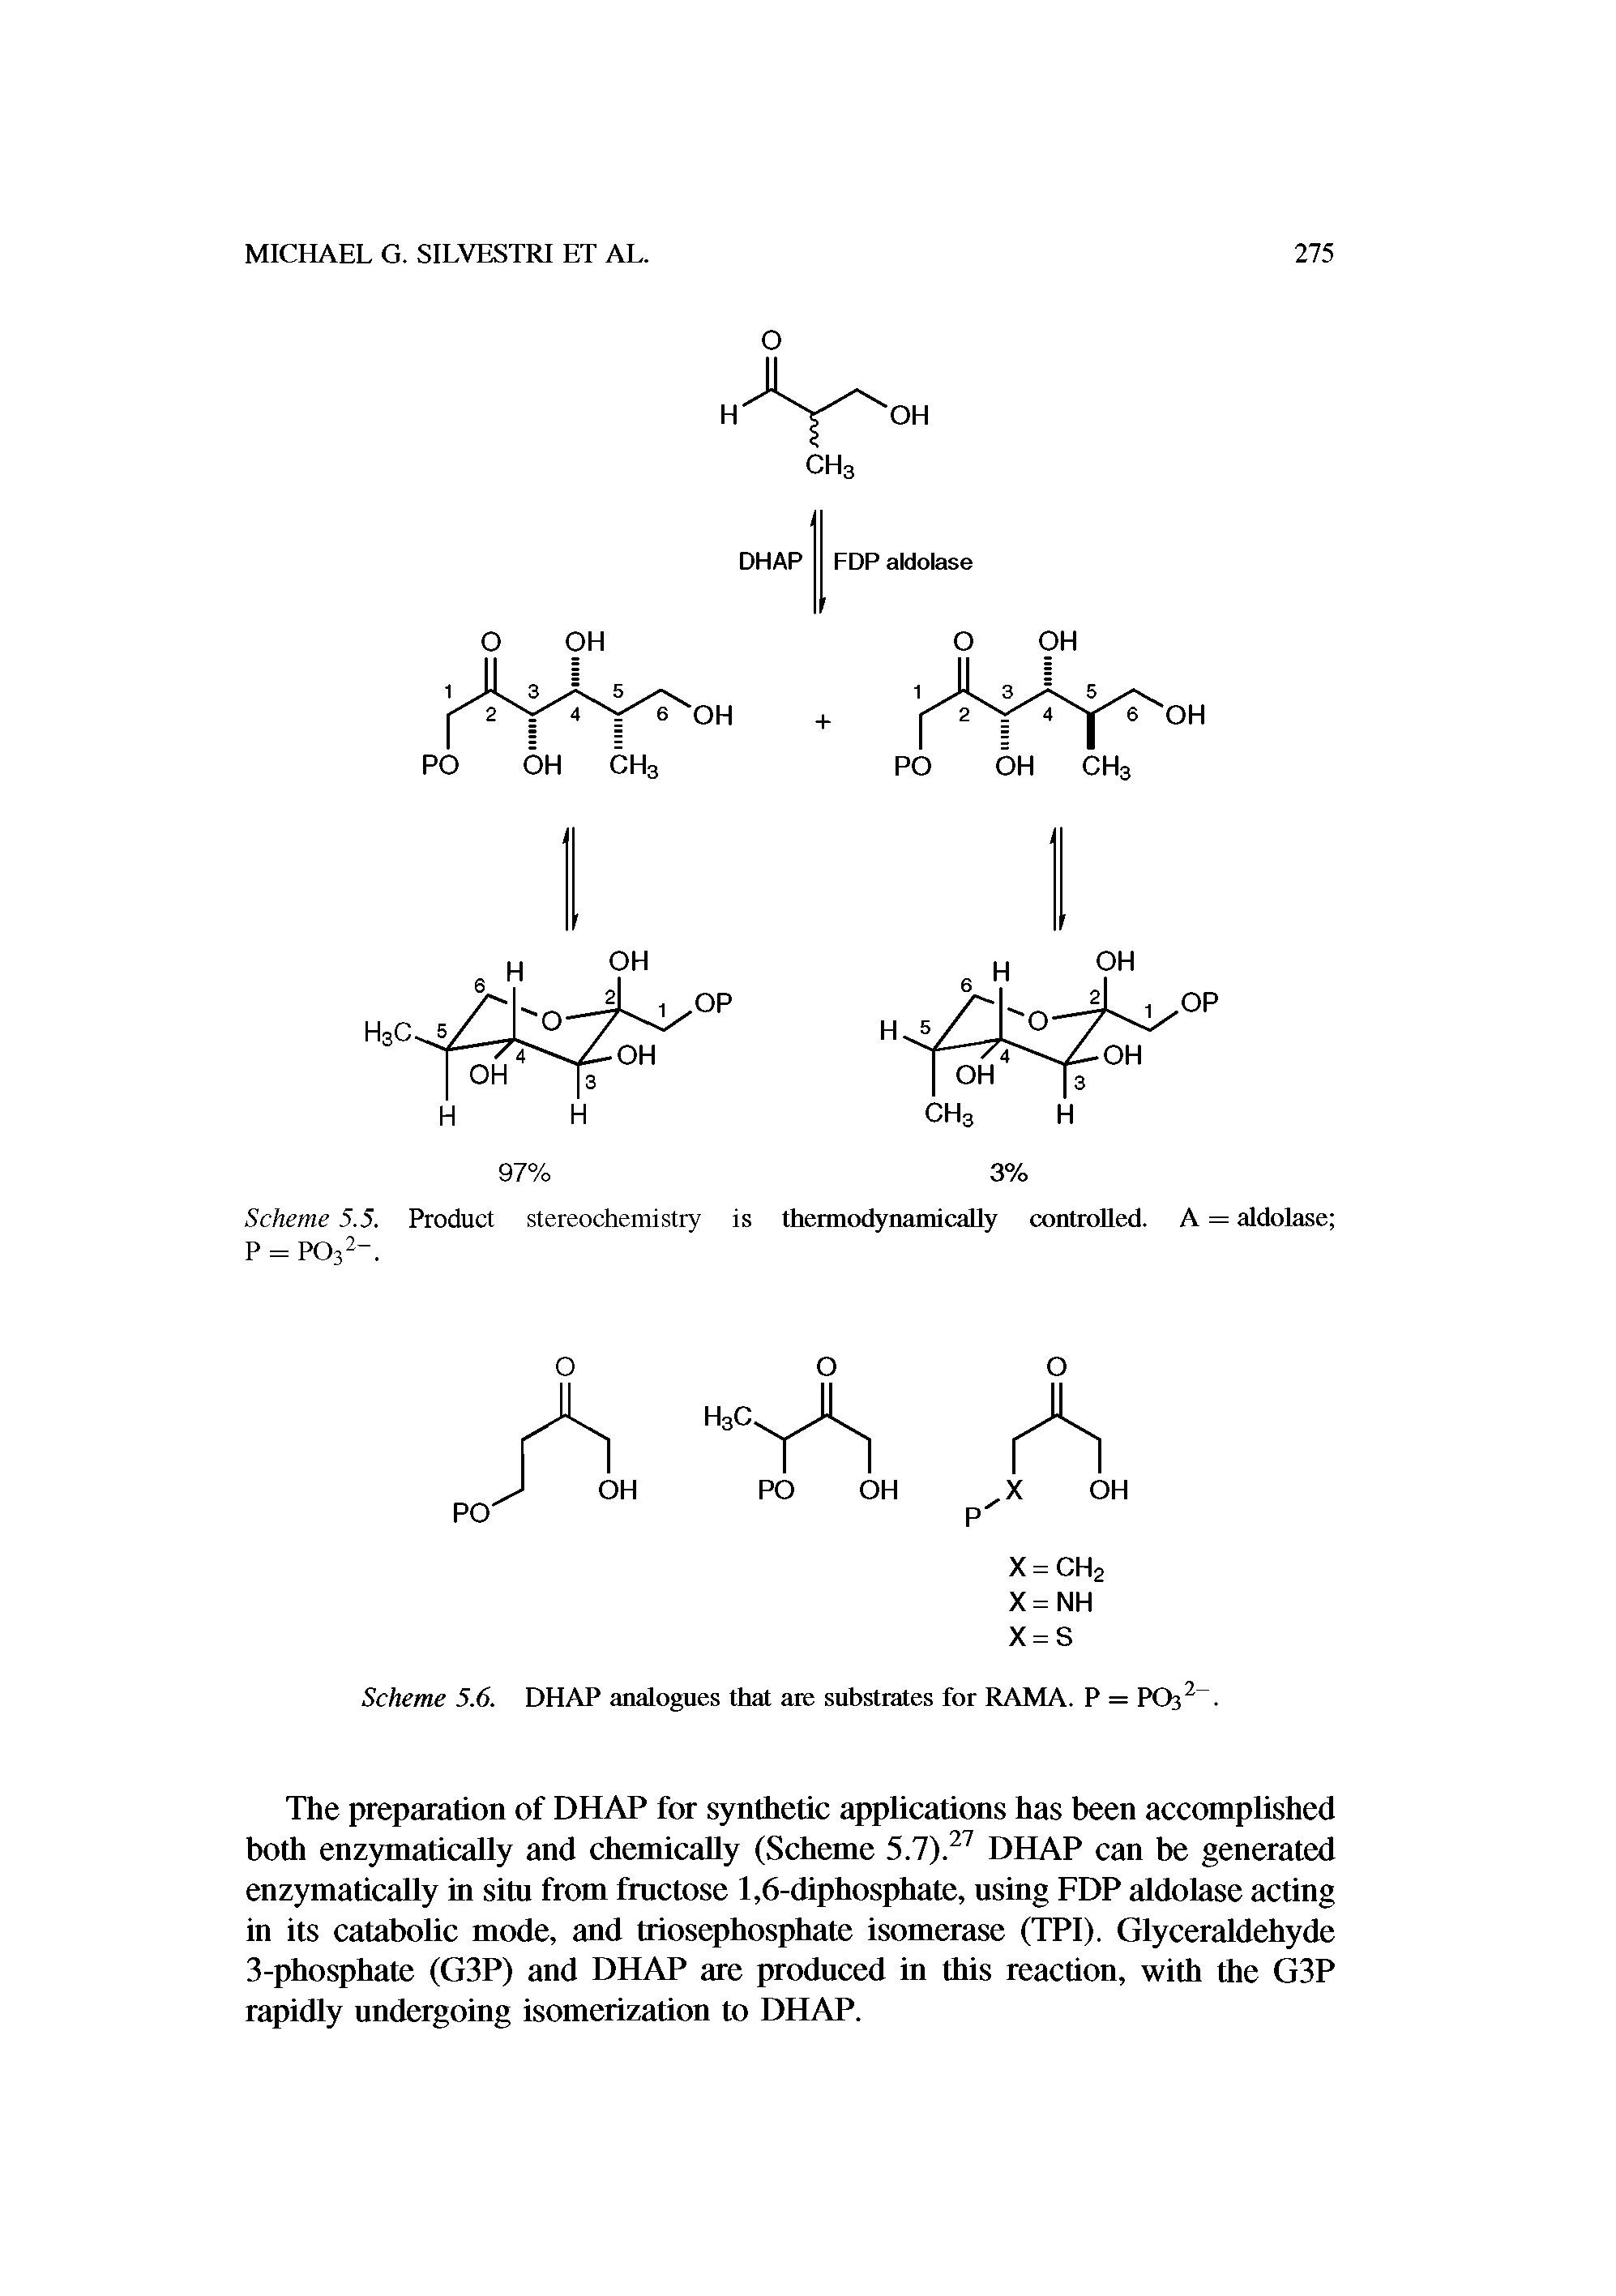 Scheme 5.5. Product stereochemistry is thermodynamically controlled. A = aldolase P = PO32-.